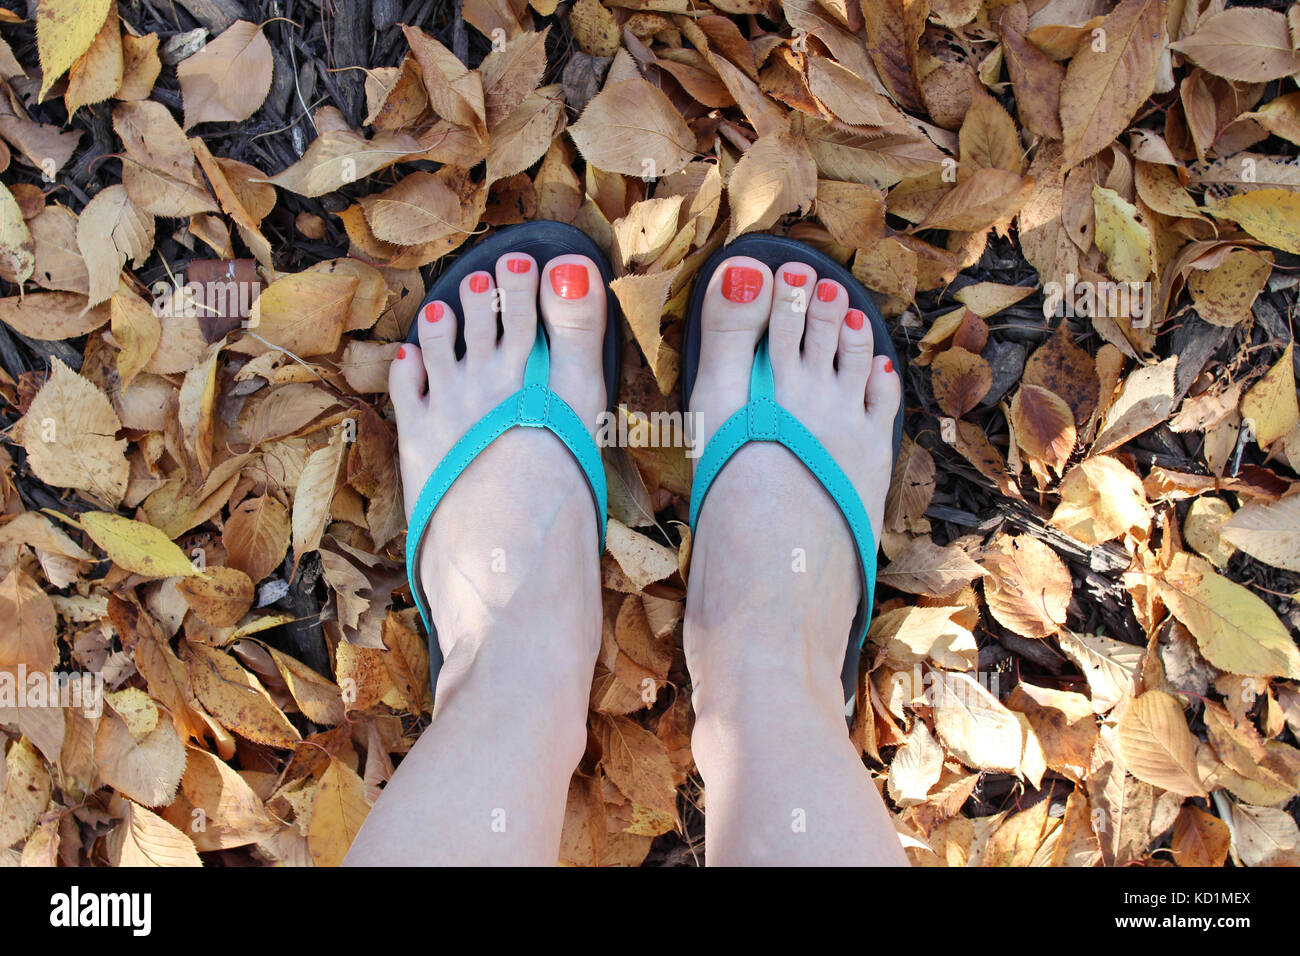 Woman Wearing Flip Flops Stock Photo, Picture and Royalty Free Image. Image  94928697.